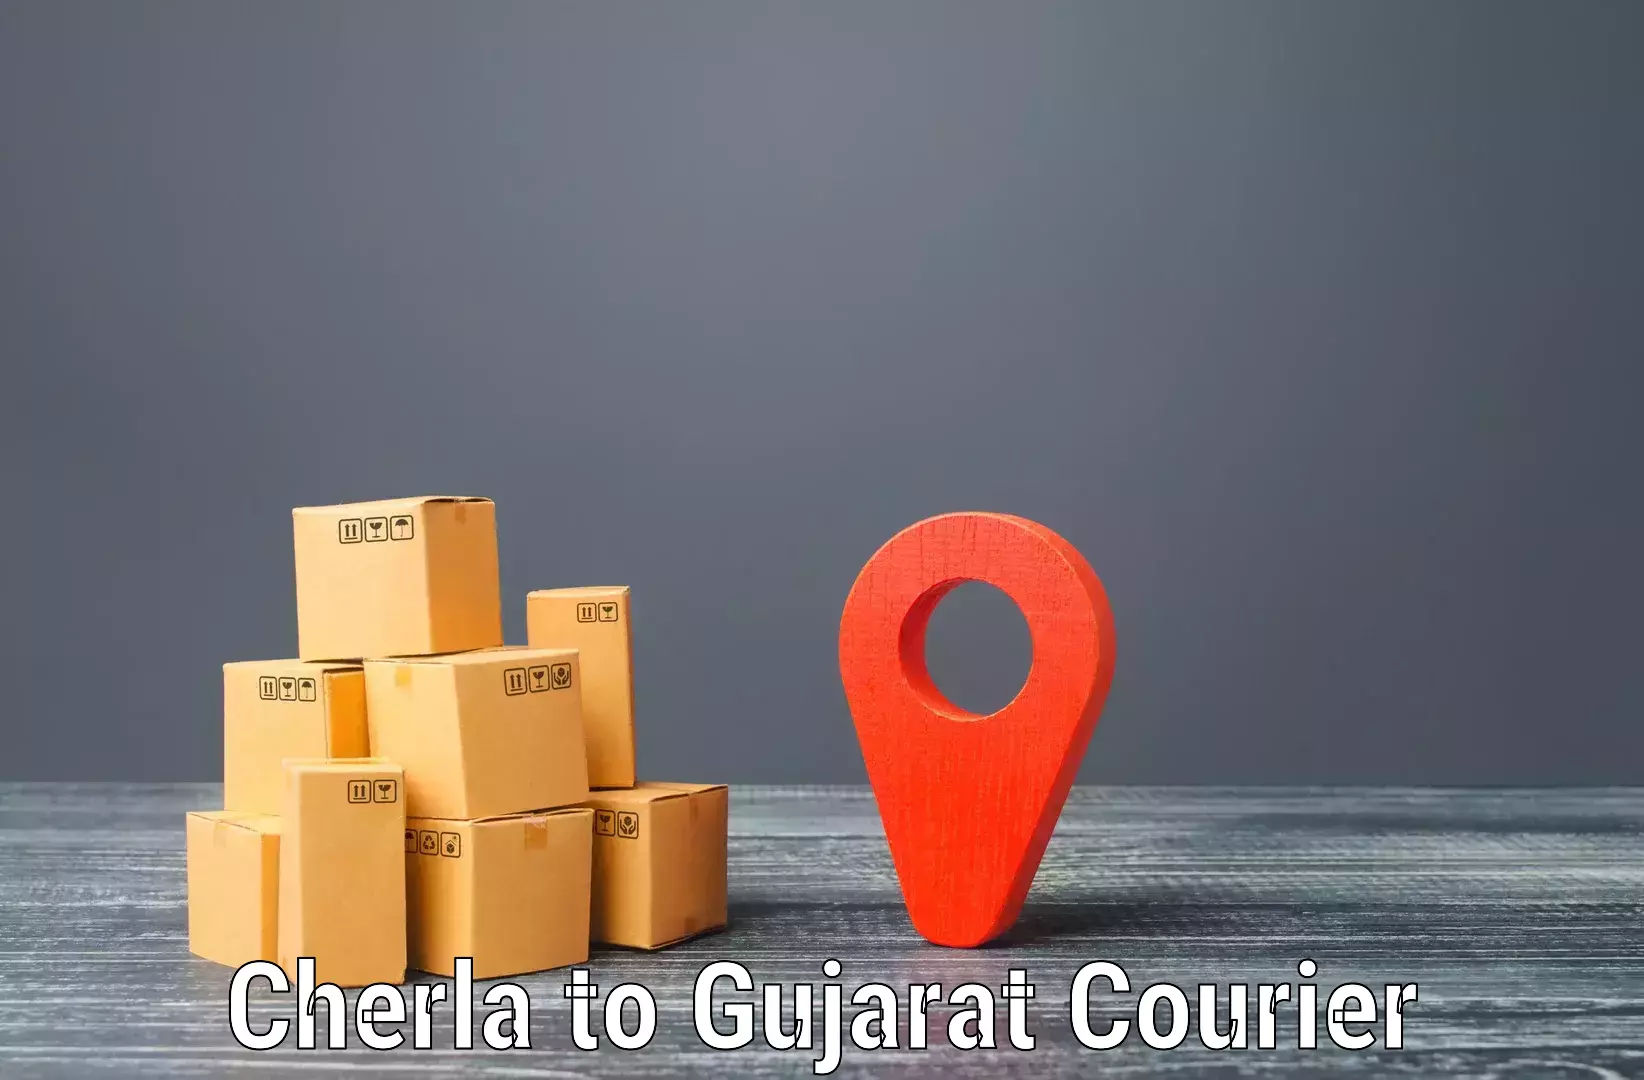 Round-the-clock parcel delivery Cherla to Ahmedabad